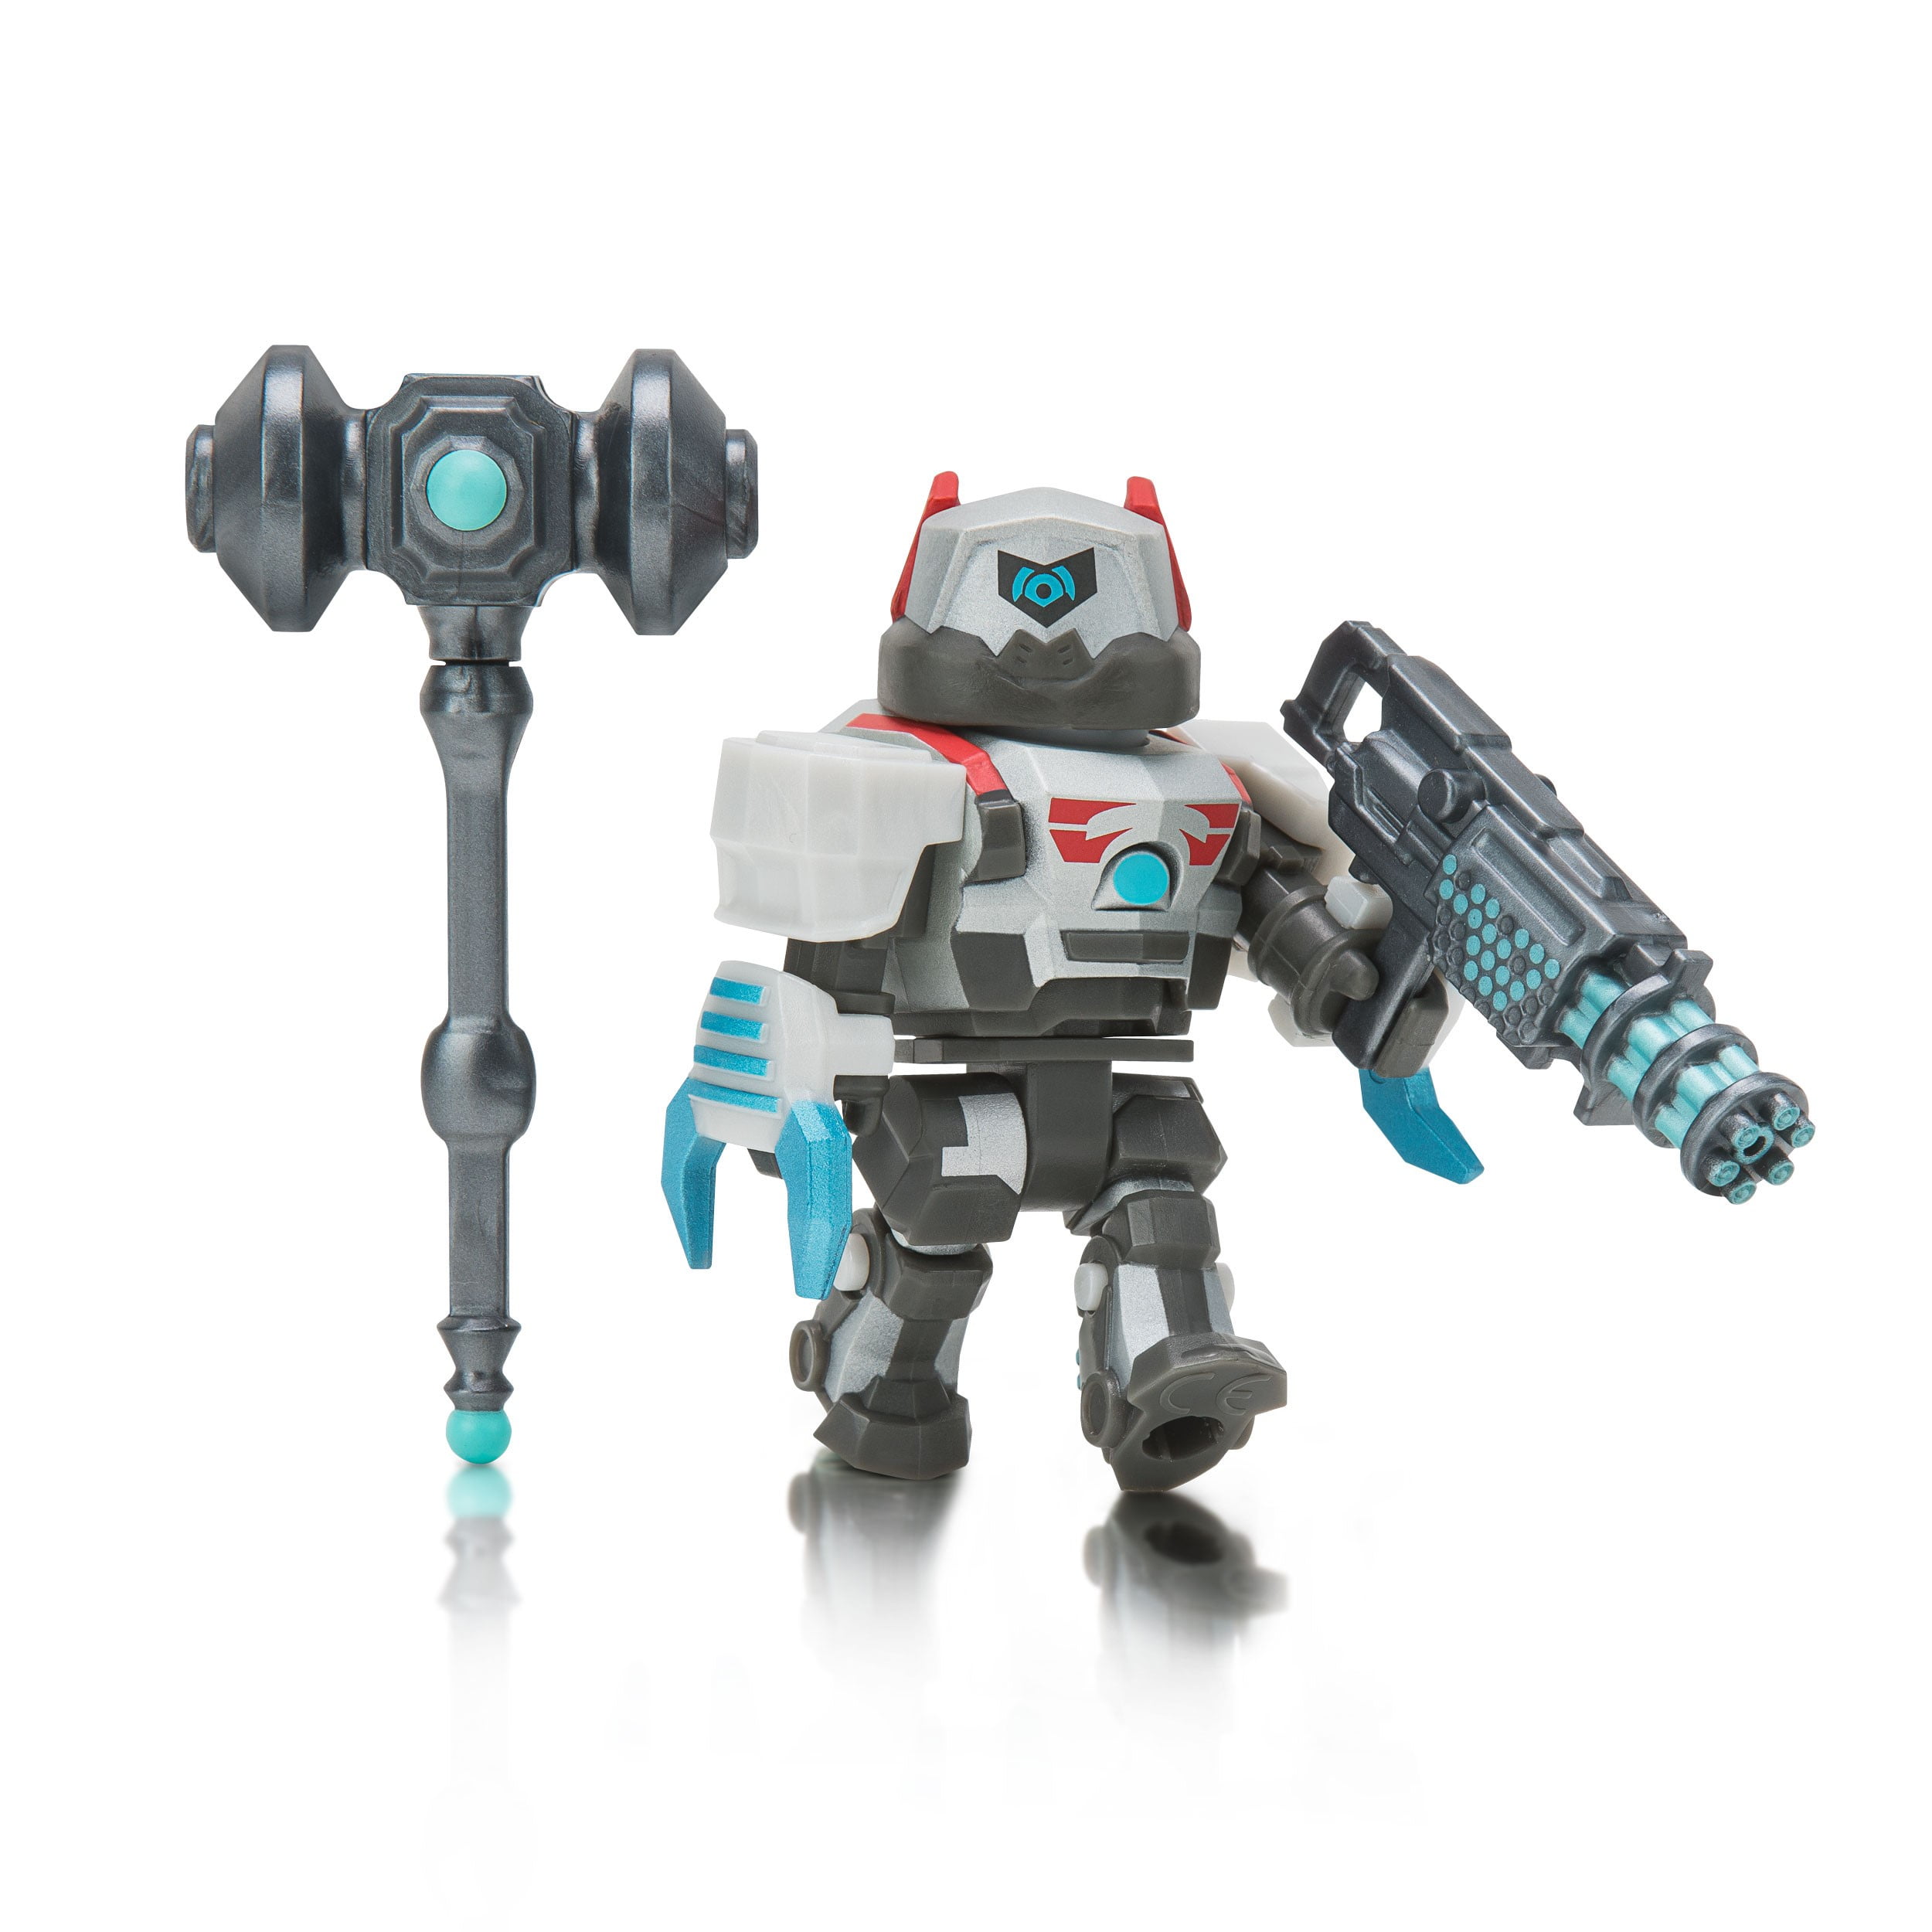 Roblox Action Collection Dueldroid 5000 Figure Pack Includes Exclusive Virtual Item Walmart Com Walmart Com - roblox action collection legendary gatekeeper s attack game pack includes exclusive virtual item walmart com walmart com